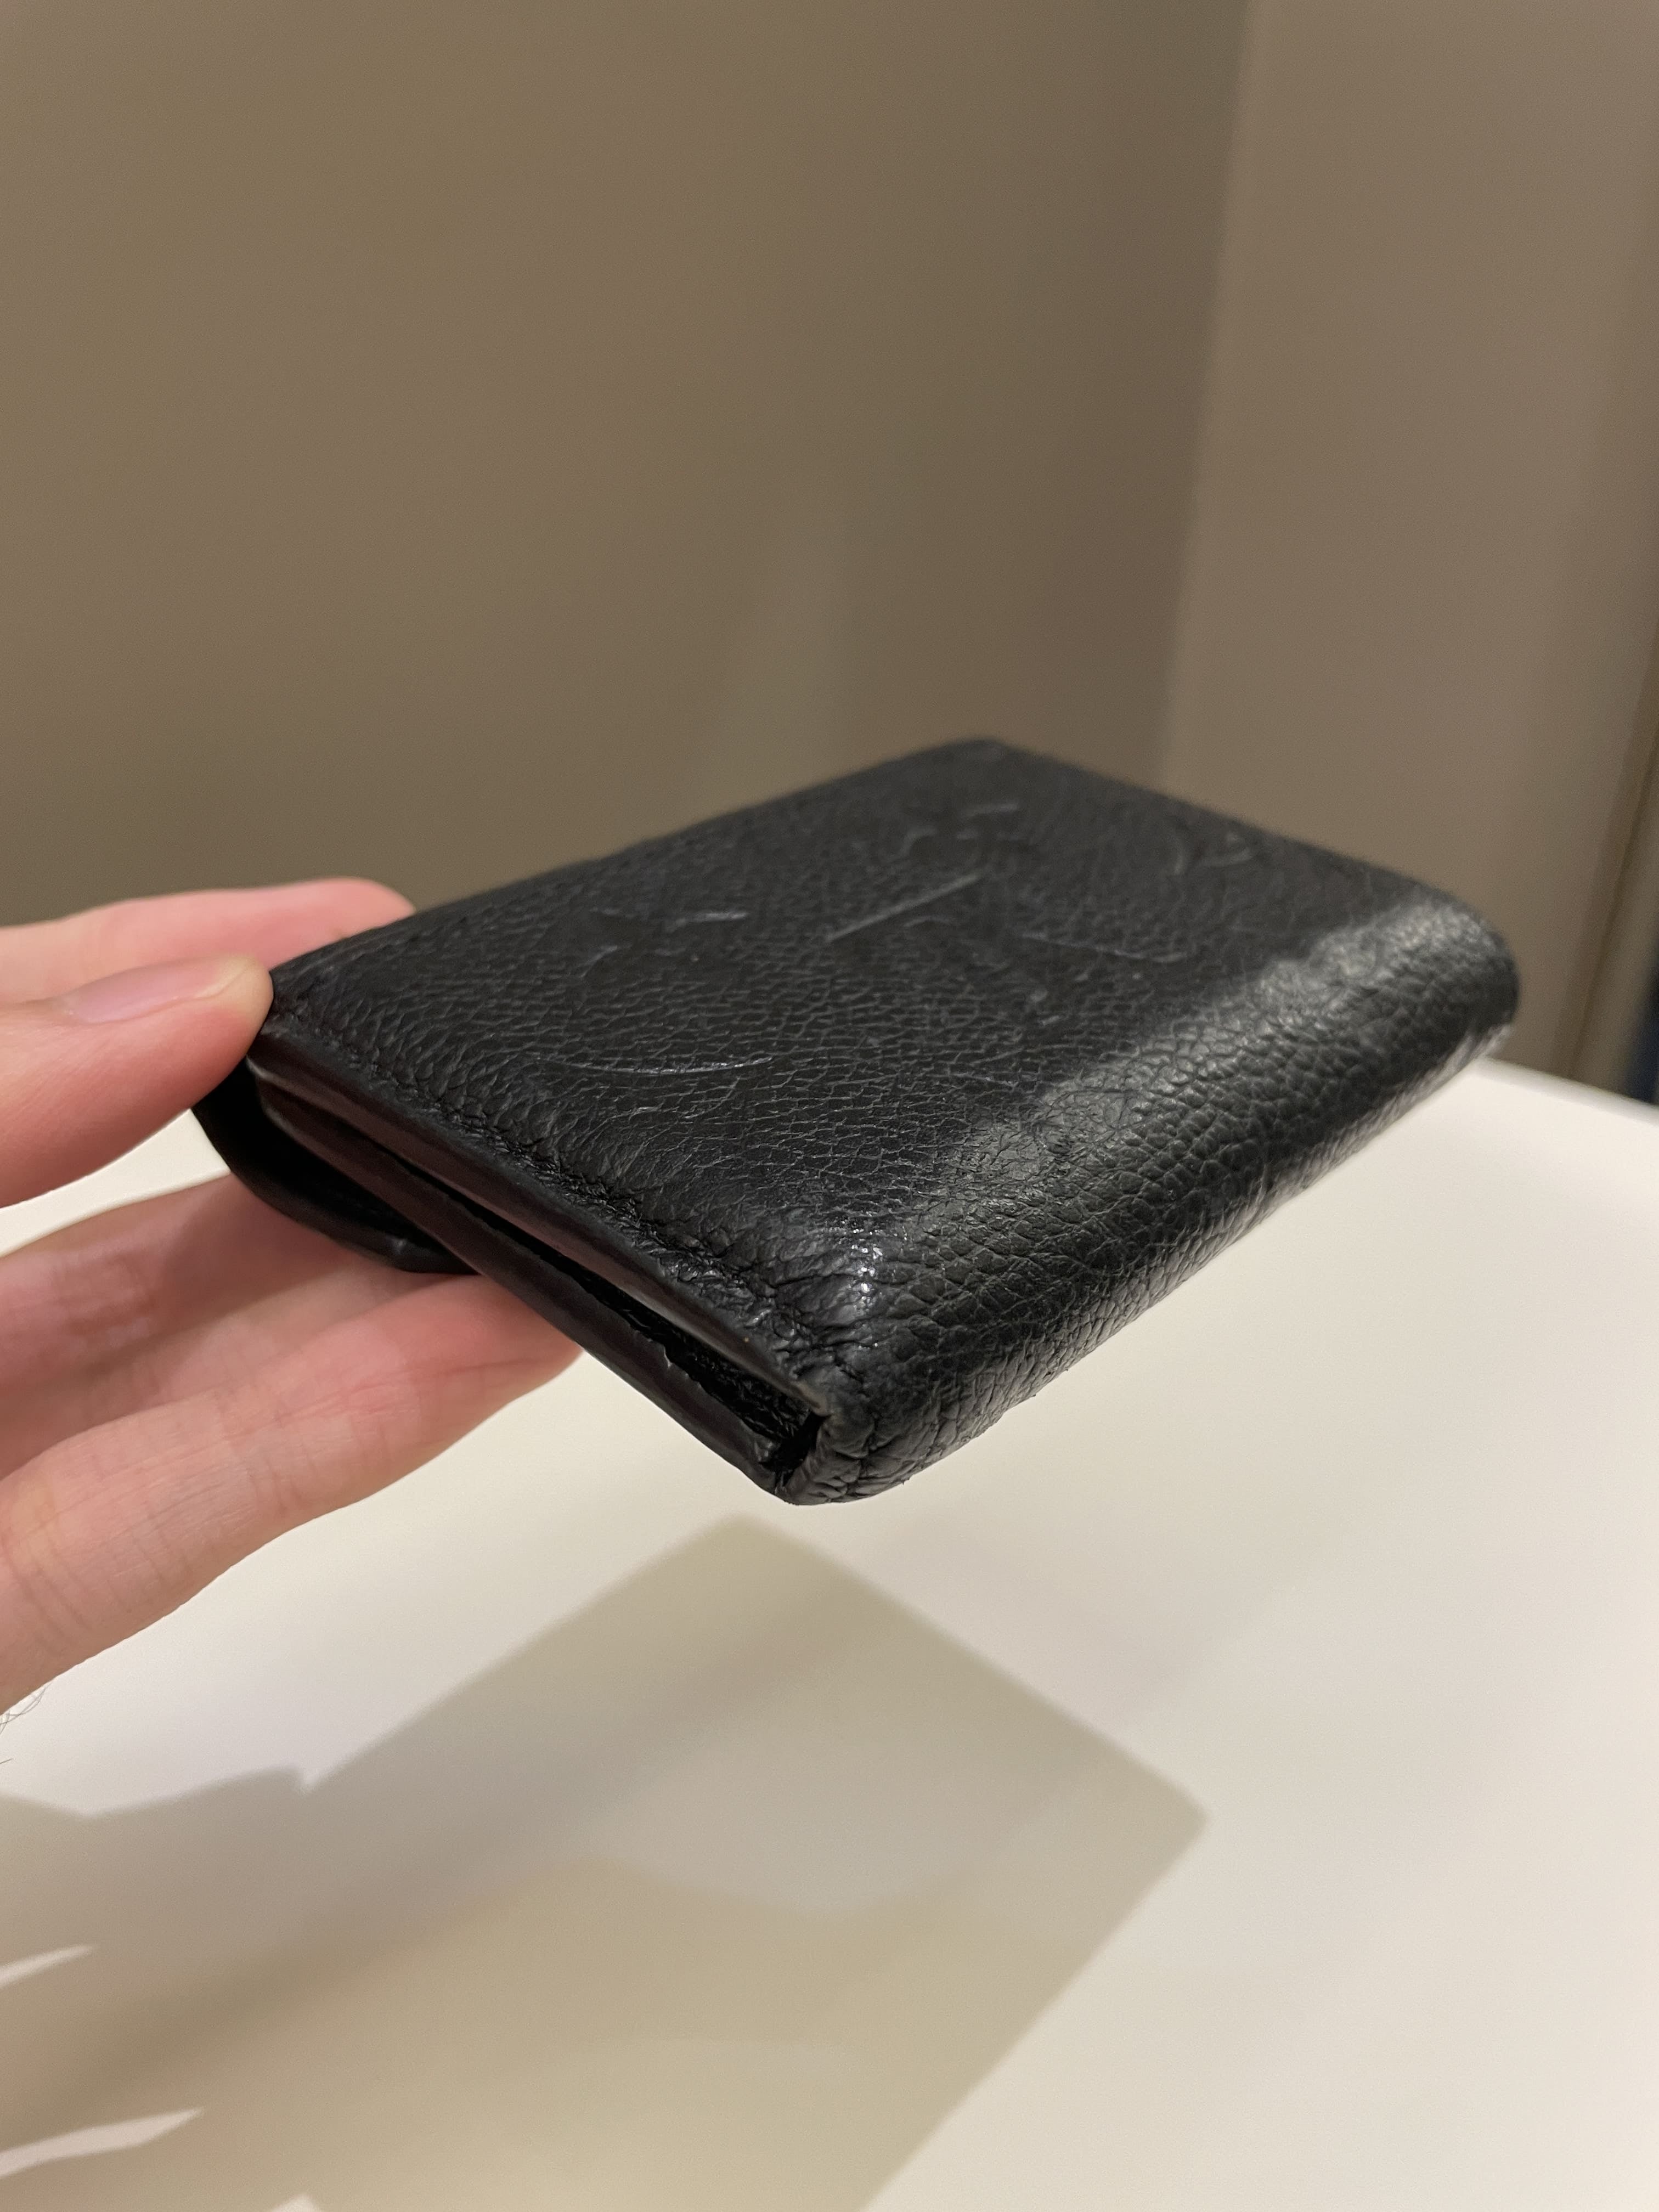 Authentic Louis Vuitton Black Bifold Taiga Leather Compact Wallet